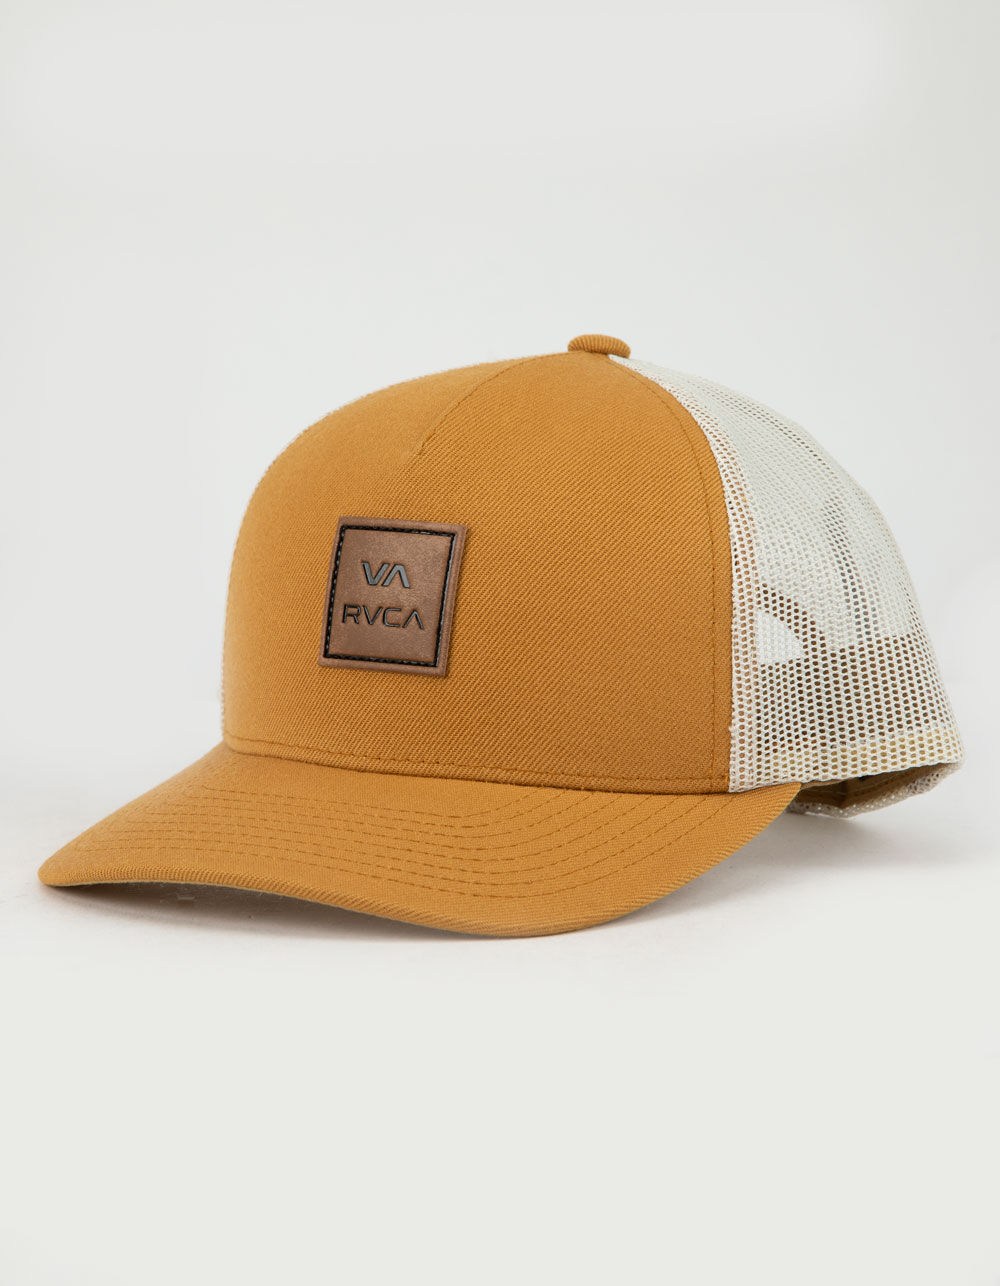 RVCA VA All The Way Brown Mens Trucker Hat image number 0